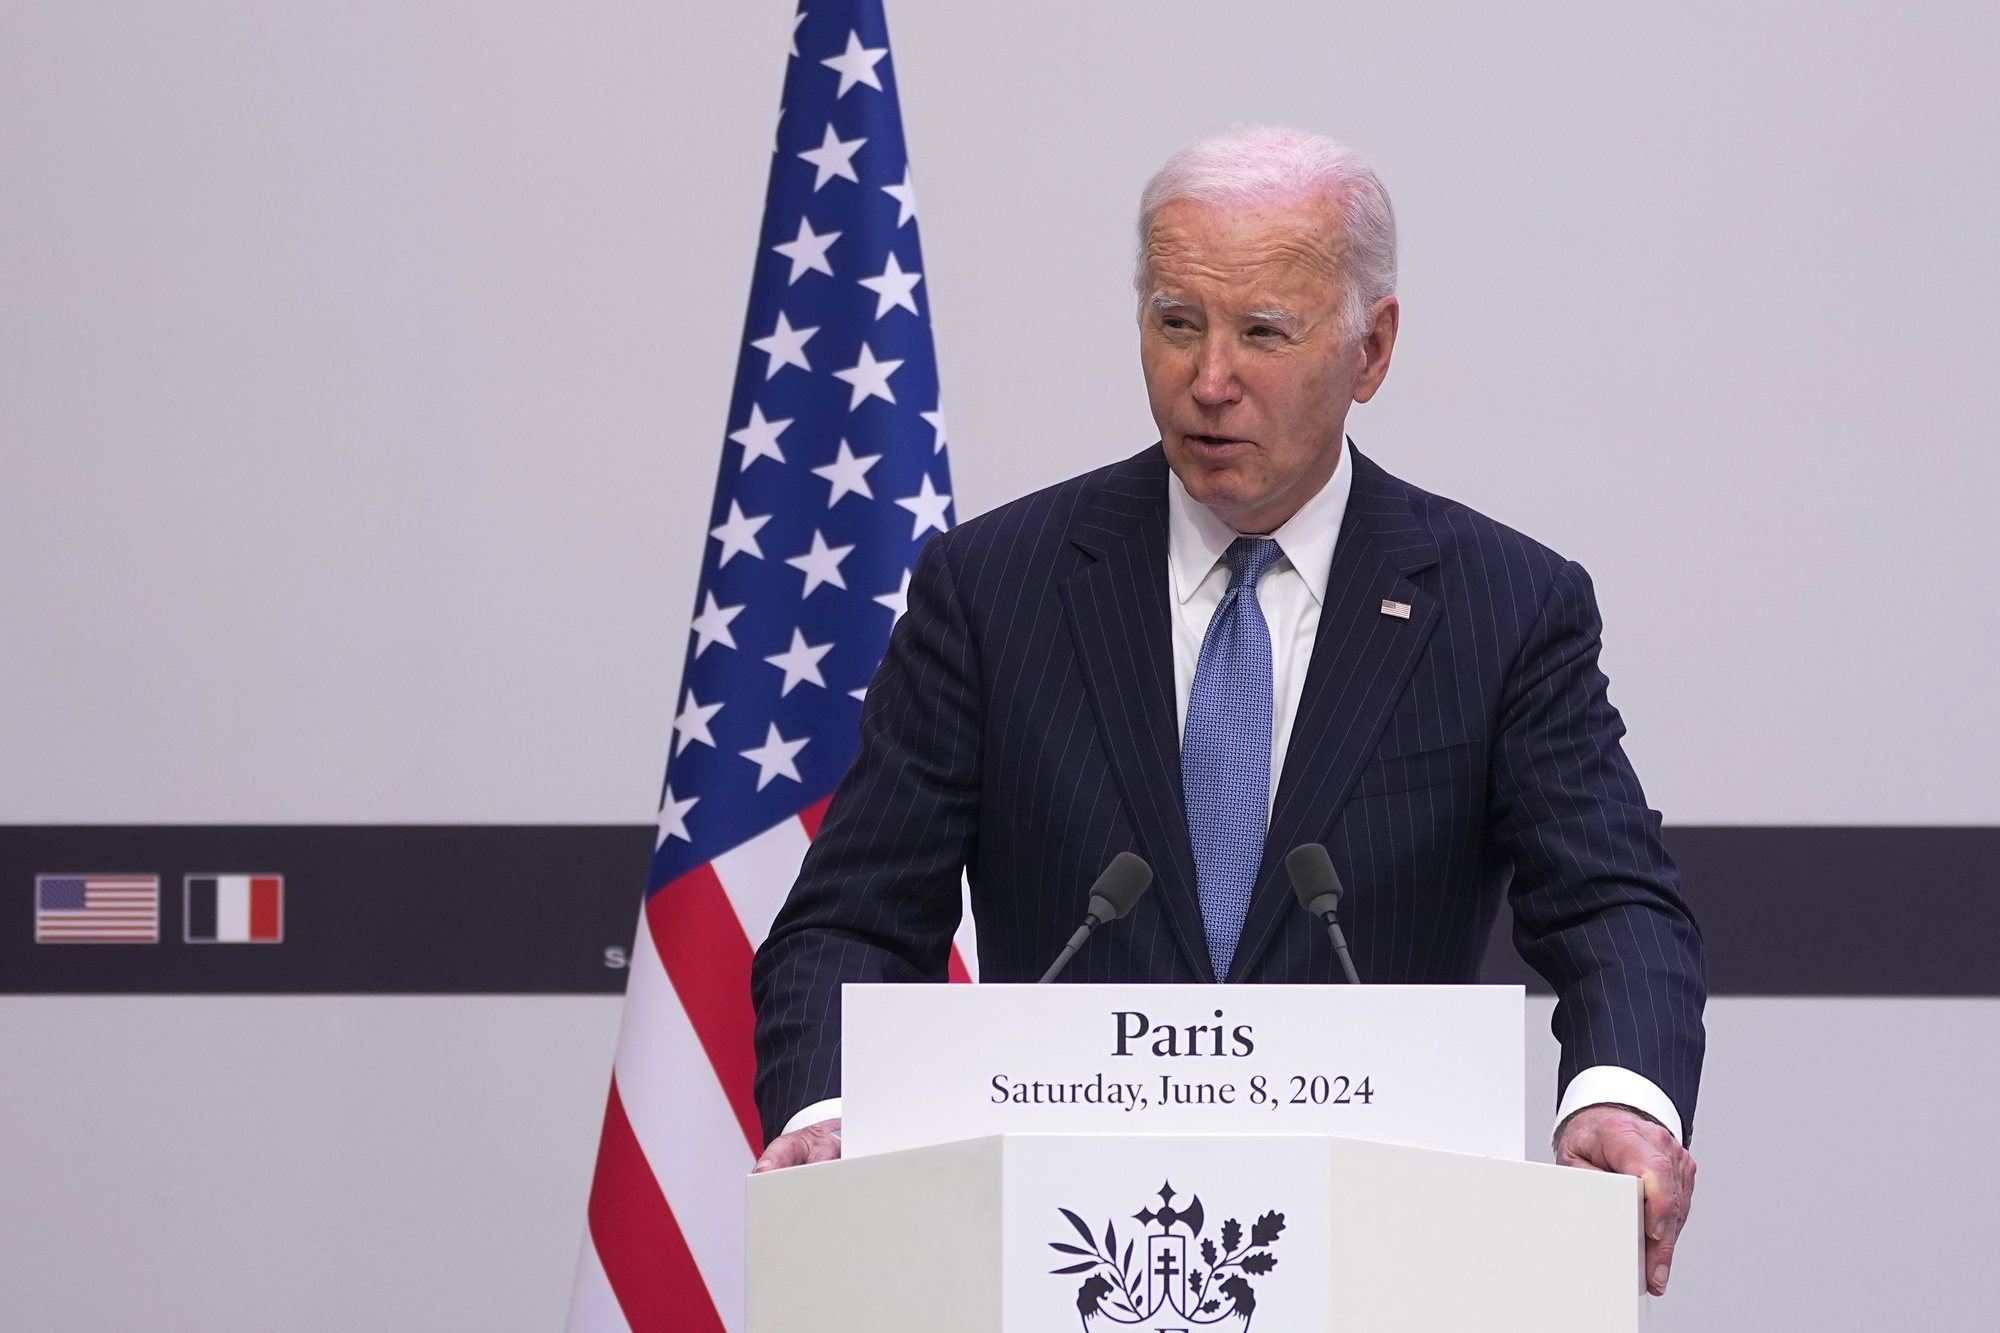 epa11397732 US President Joe Biden speaks during a joint statement with French President Emmanuel Macron at the Elysee Palace in Paris, France, 08 June 2024. US President Joe Biden is being feted by French President Emmanuel Macron with a state visit, as the two allies aim to show off their partnership on global security issues and move past trade tensions.  EPA/MICHEL EULER / POOL MAXPPP OUT